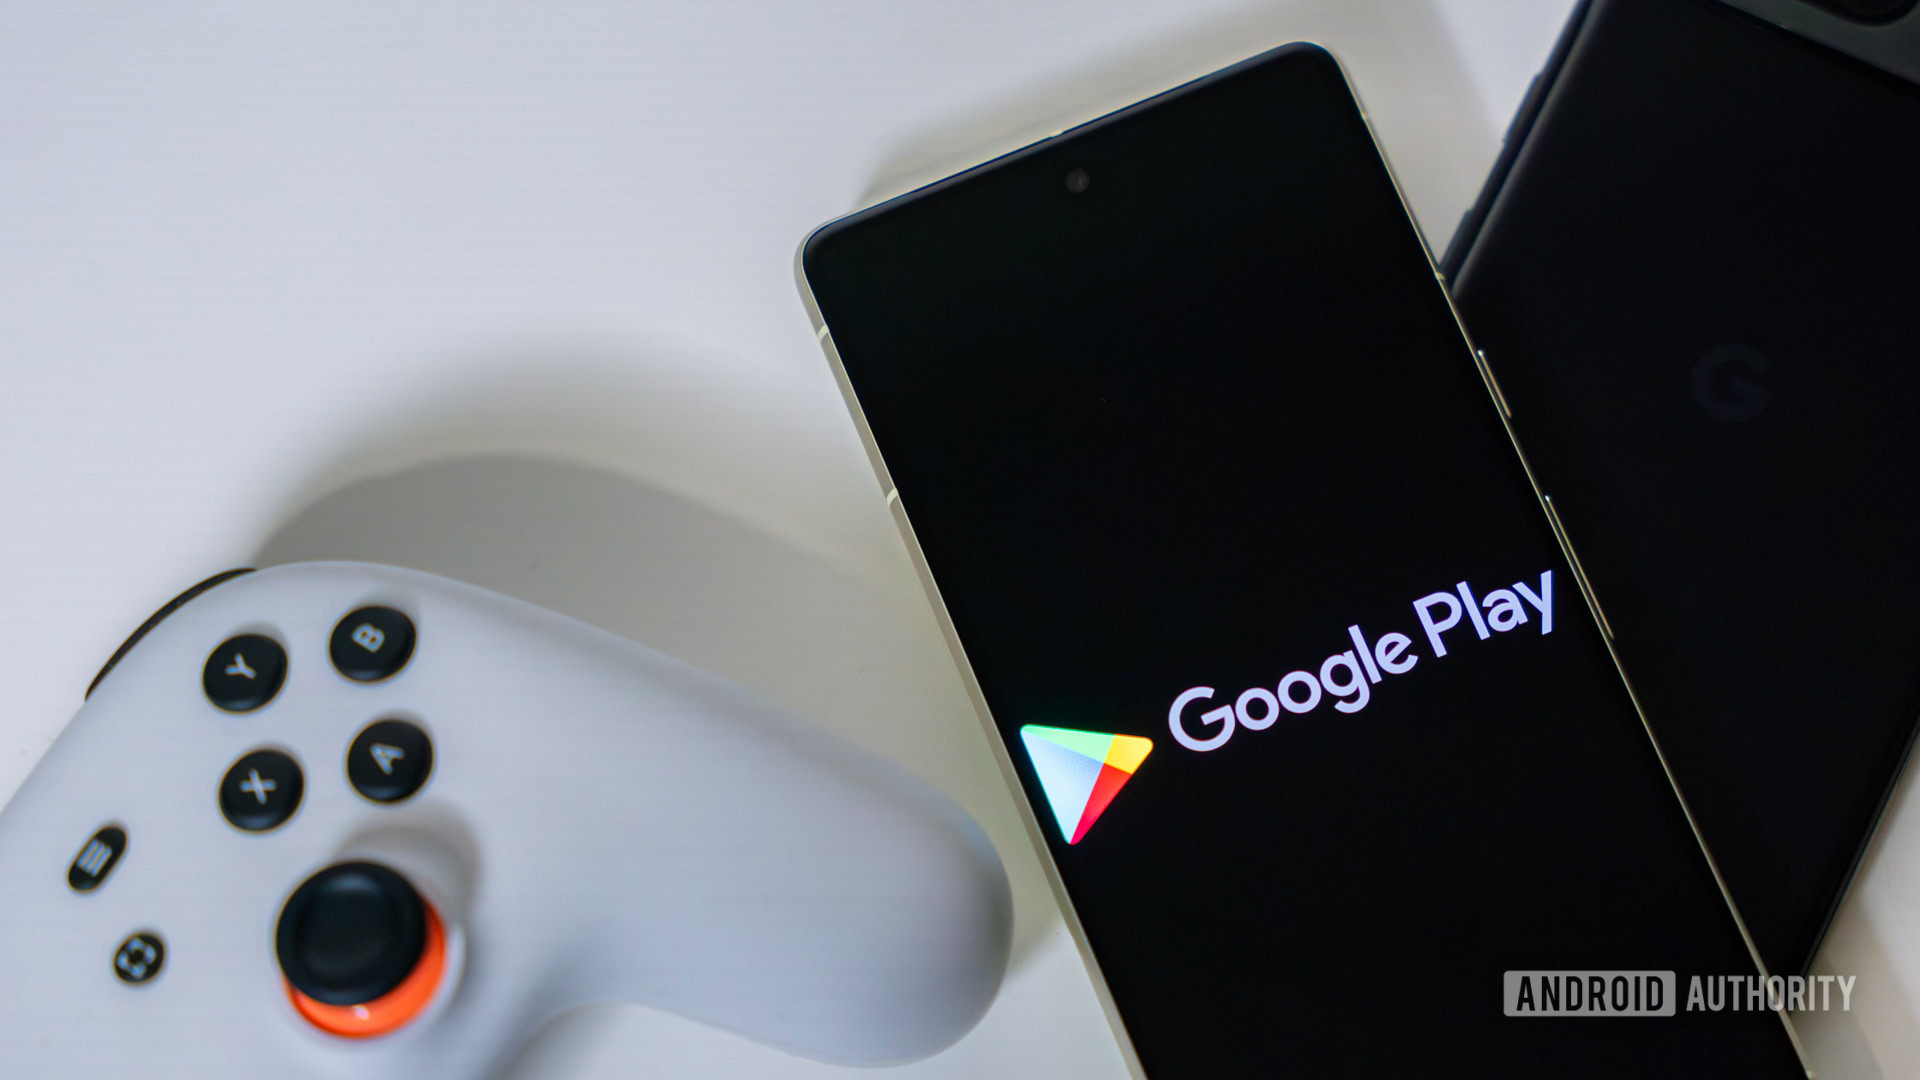 Google Play Store preps new tools for app discovery (Update: Screenshots)